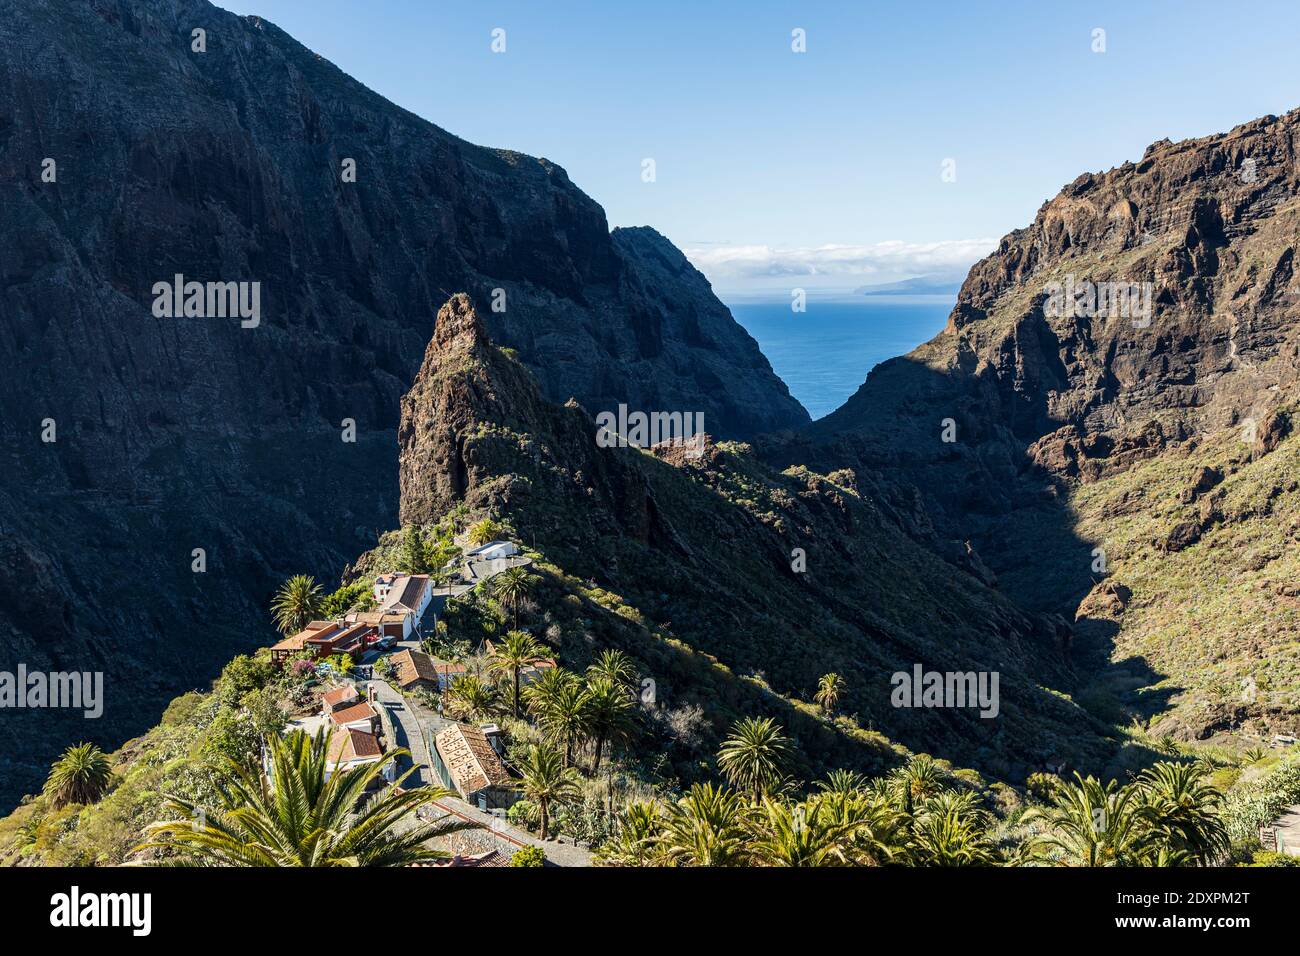 Views into the barranco, gorge and village of Masca, Tenerife, Canary Islands, Spain Stock Photo